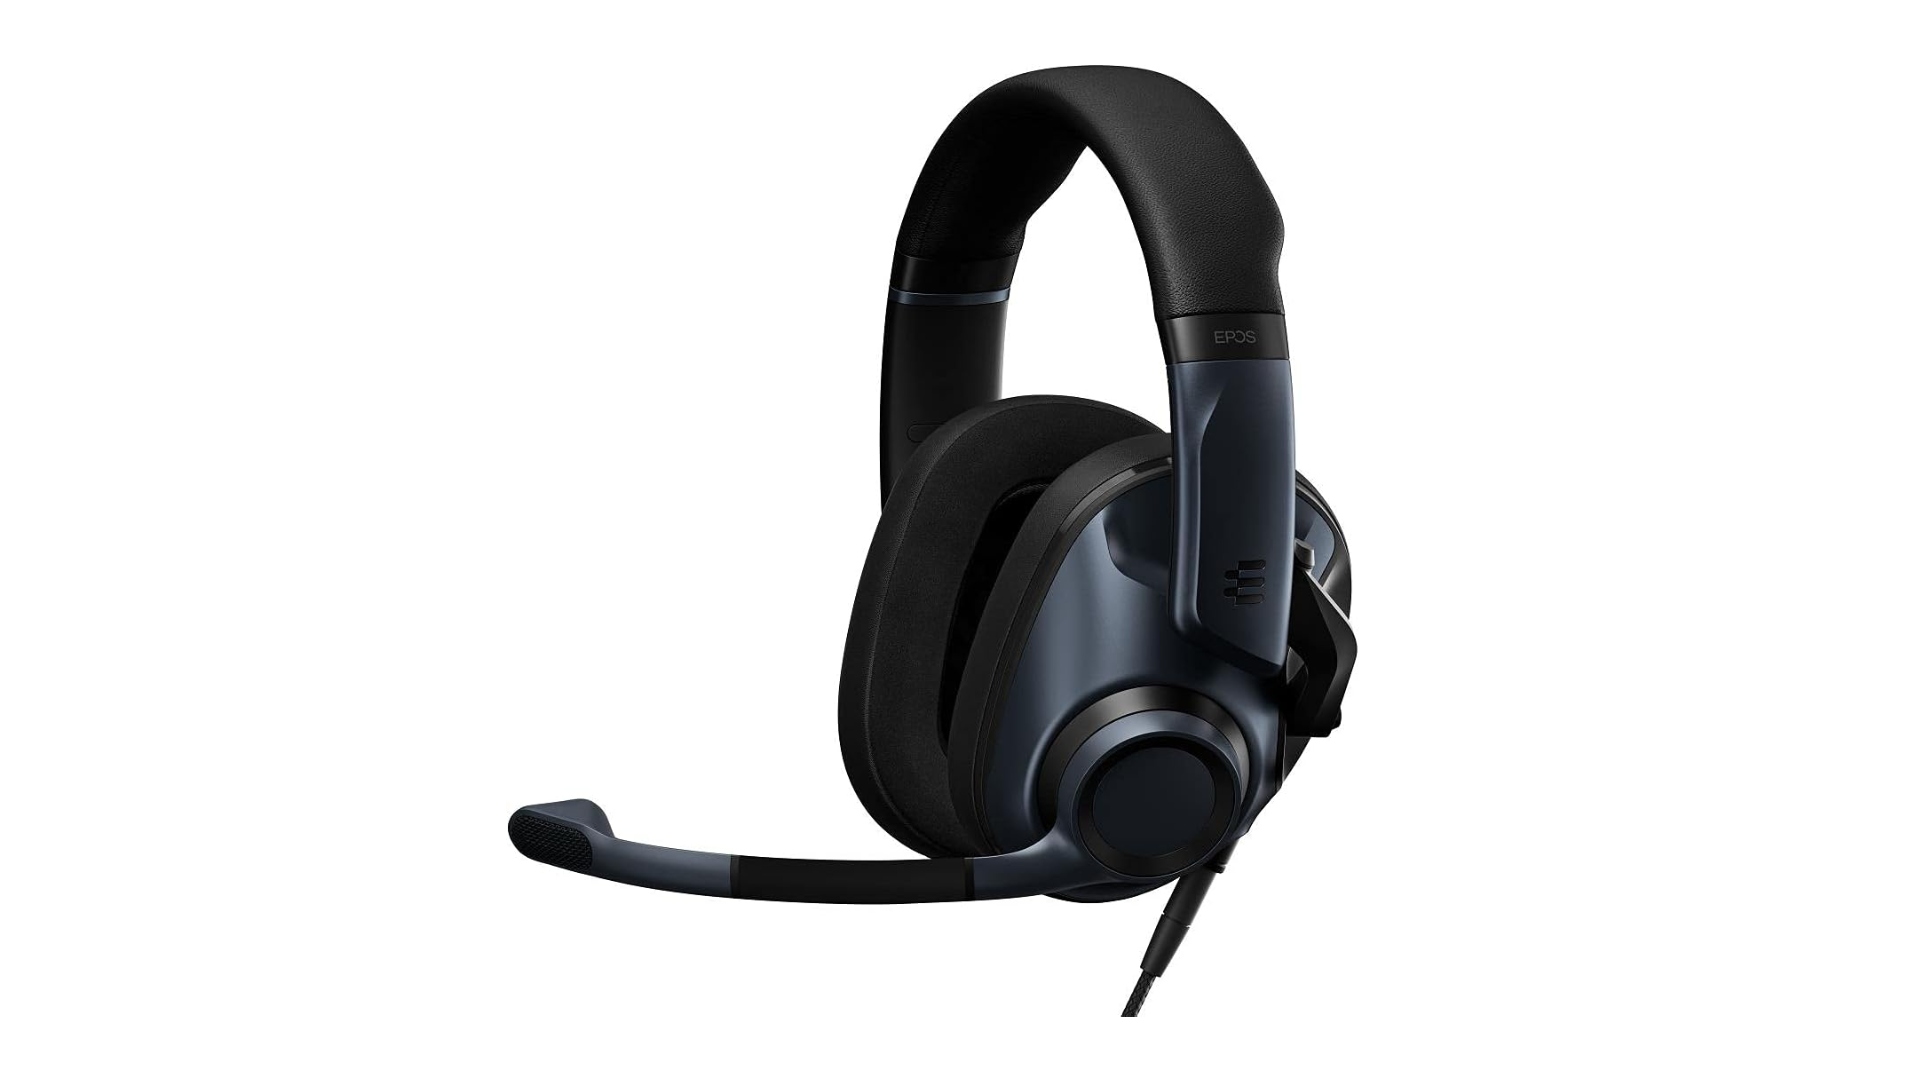 Save up to £95 off this Epos H6 Pro gaming headset from  in